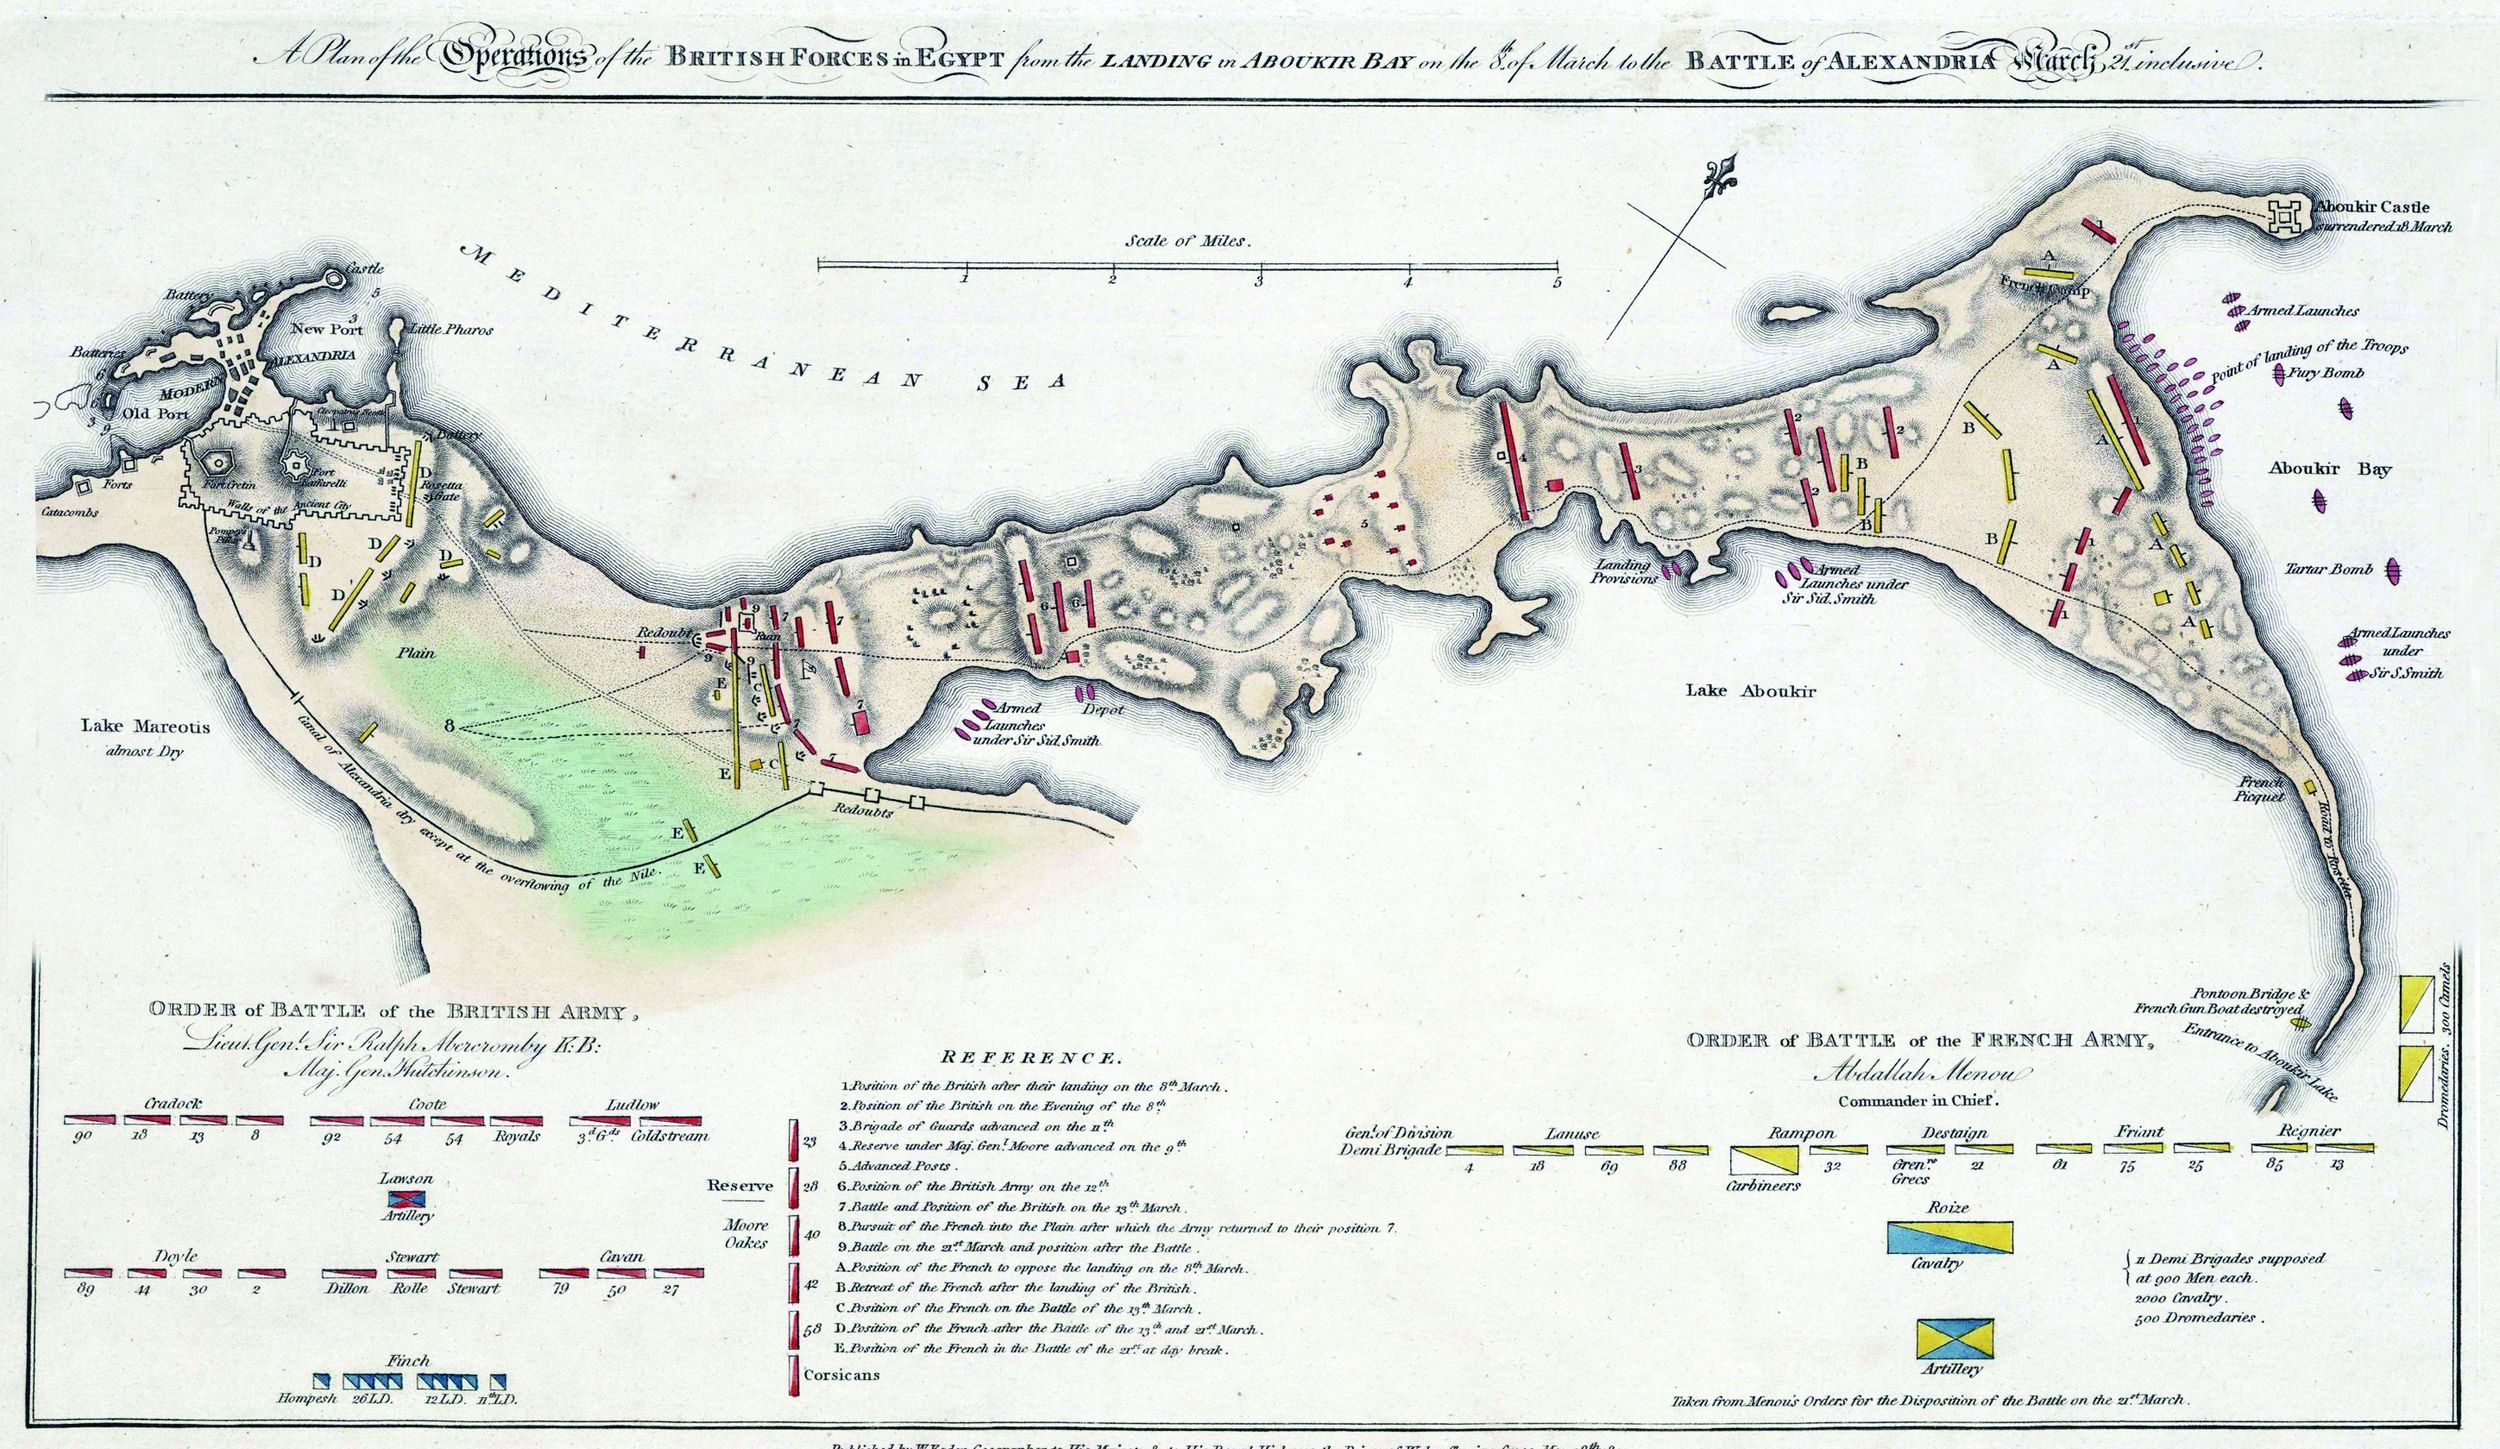 This period map shows the British progress toward Alexandria, moving from right to left. The redoubt by the sea on the British right is the site of Moore’s repulse of the main French attack.